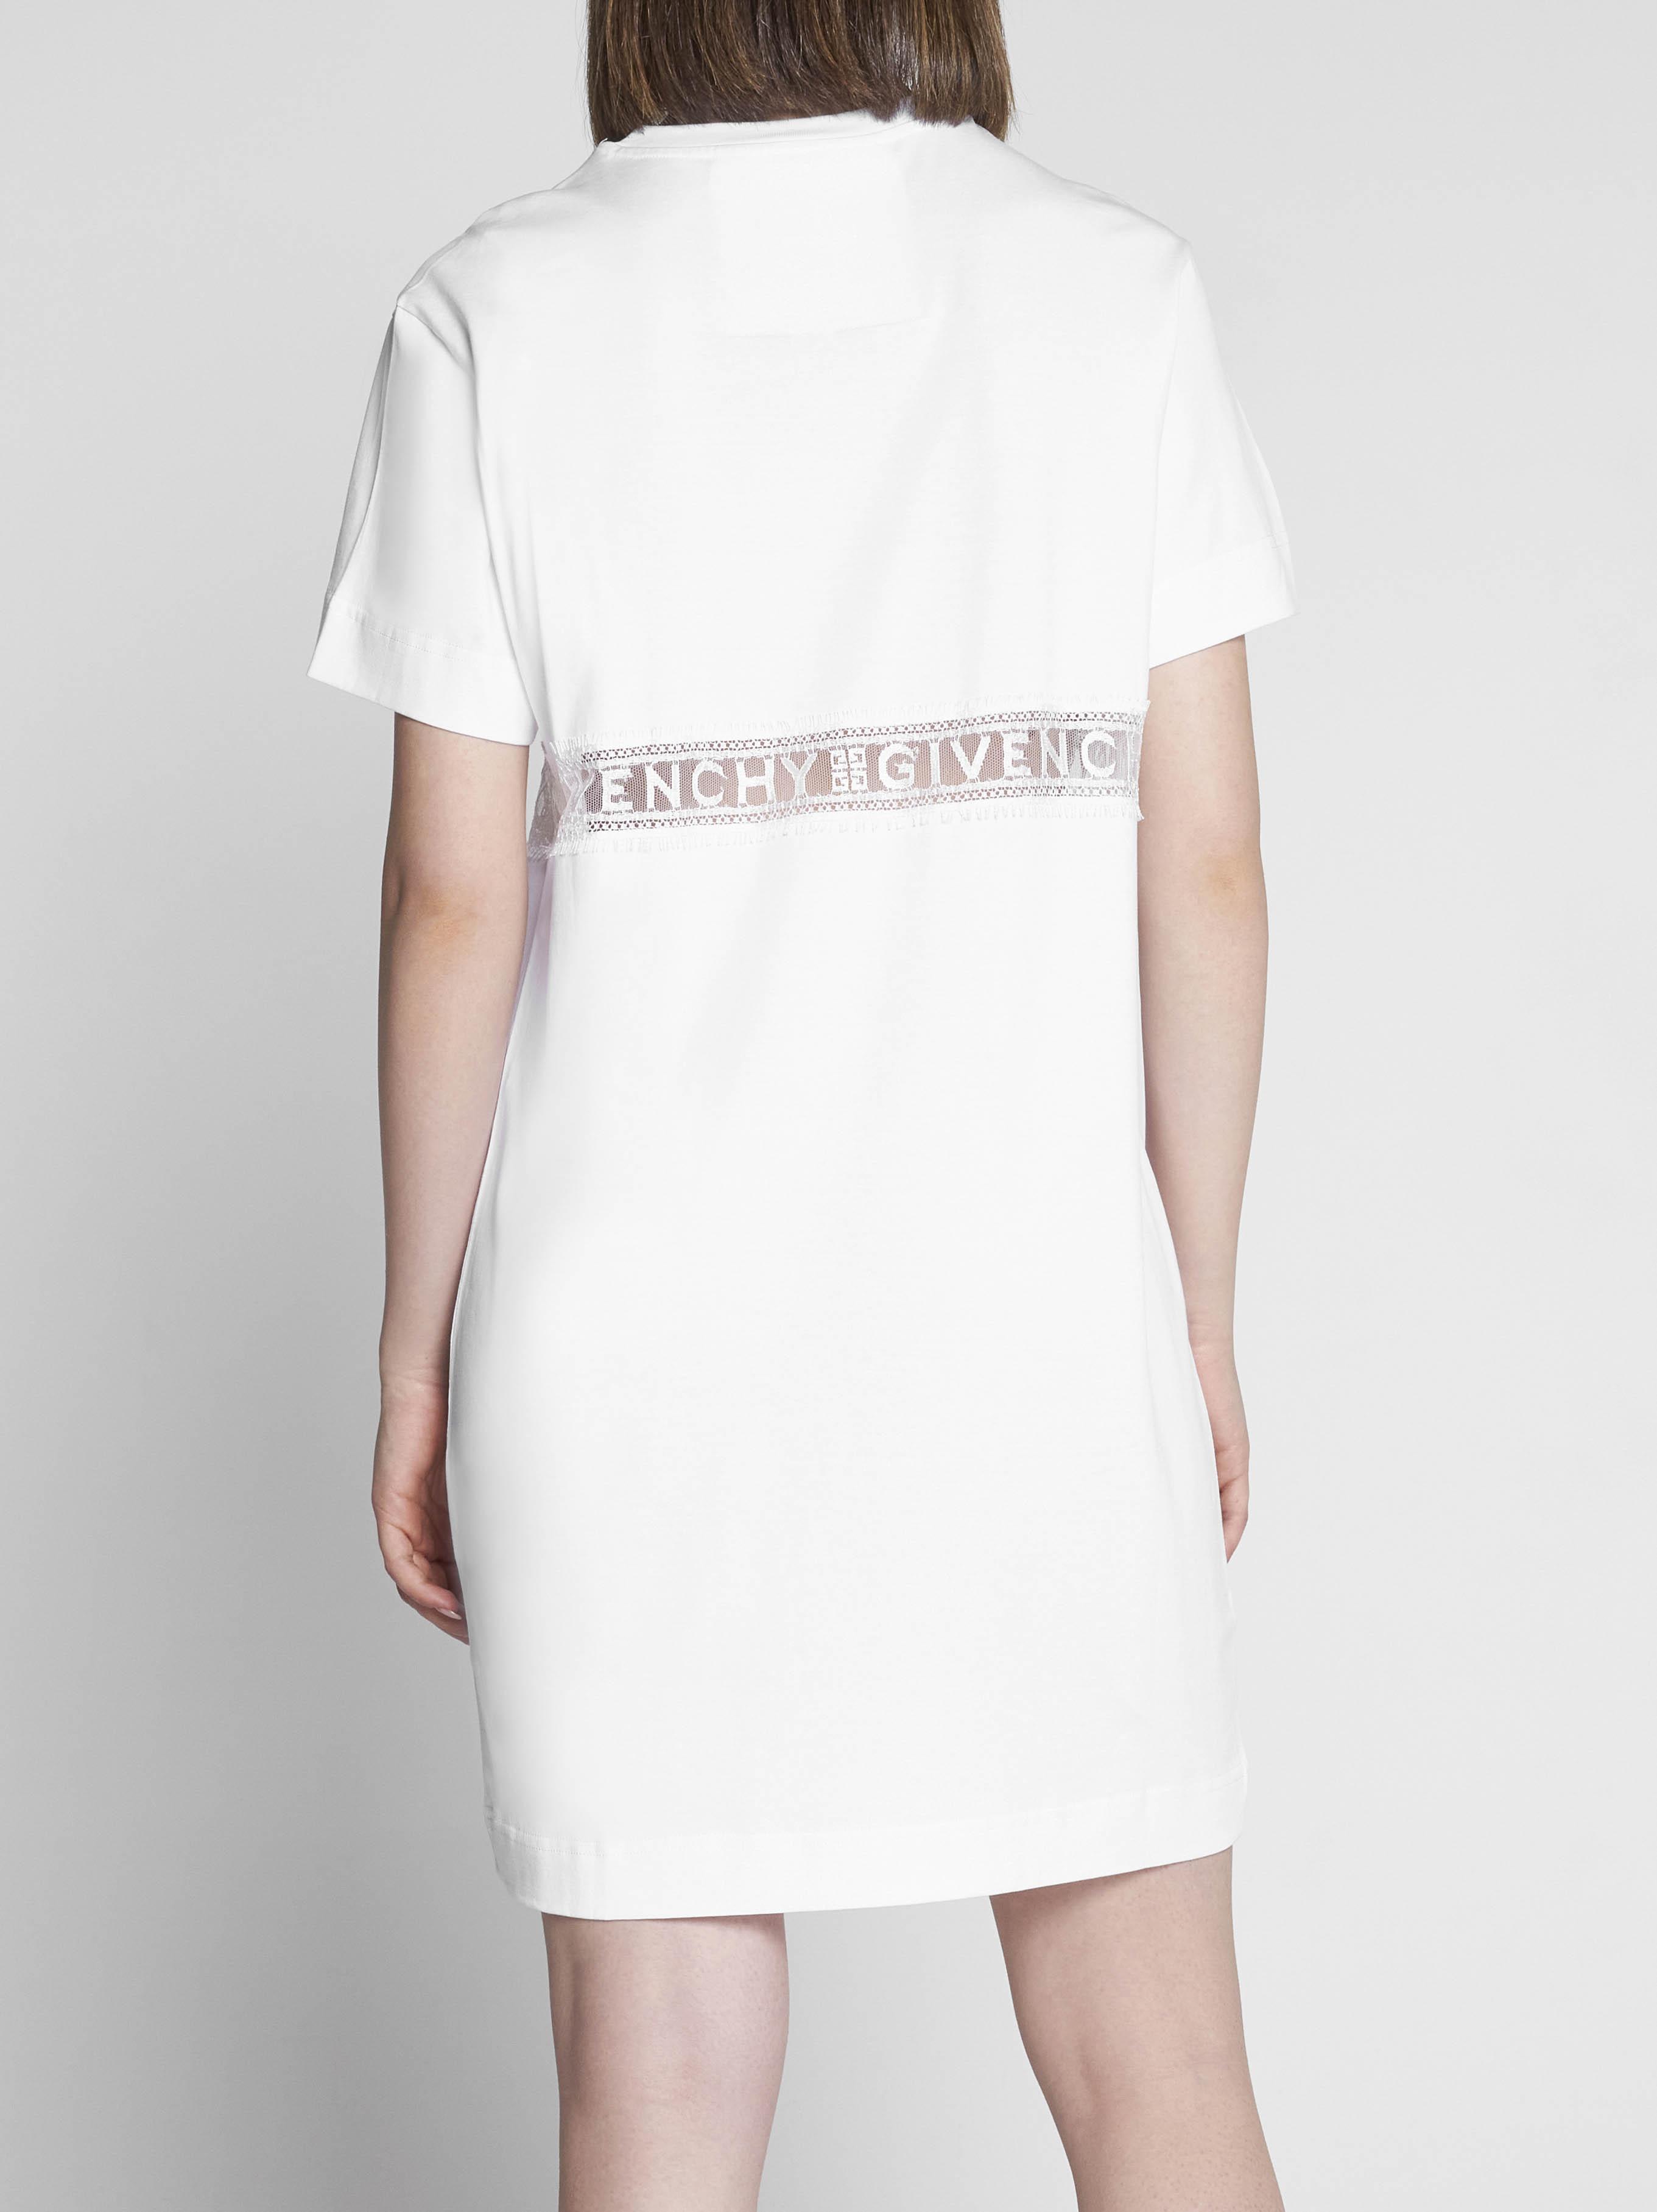 Givenchy Logo Cotton T-shirt Dress in White | Lyst UK